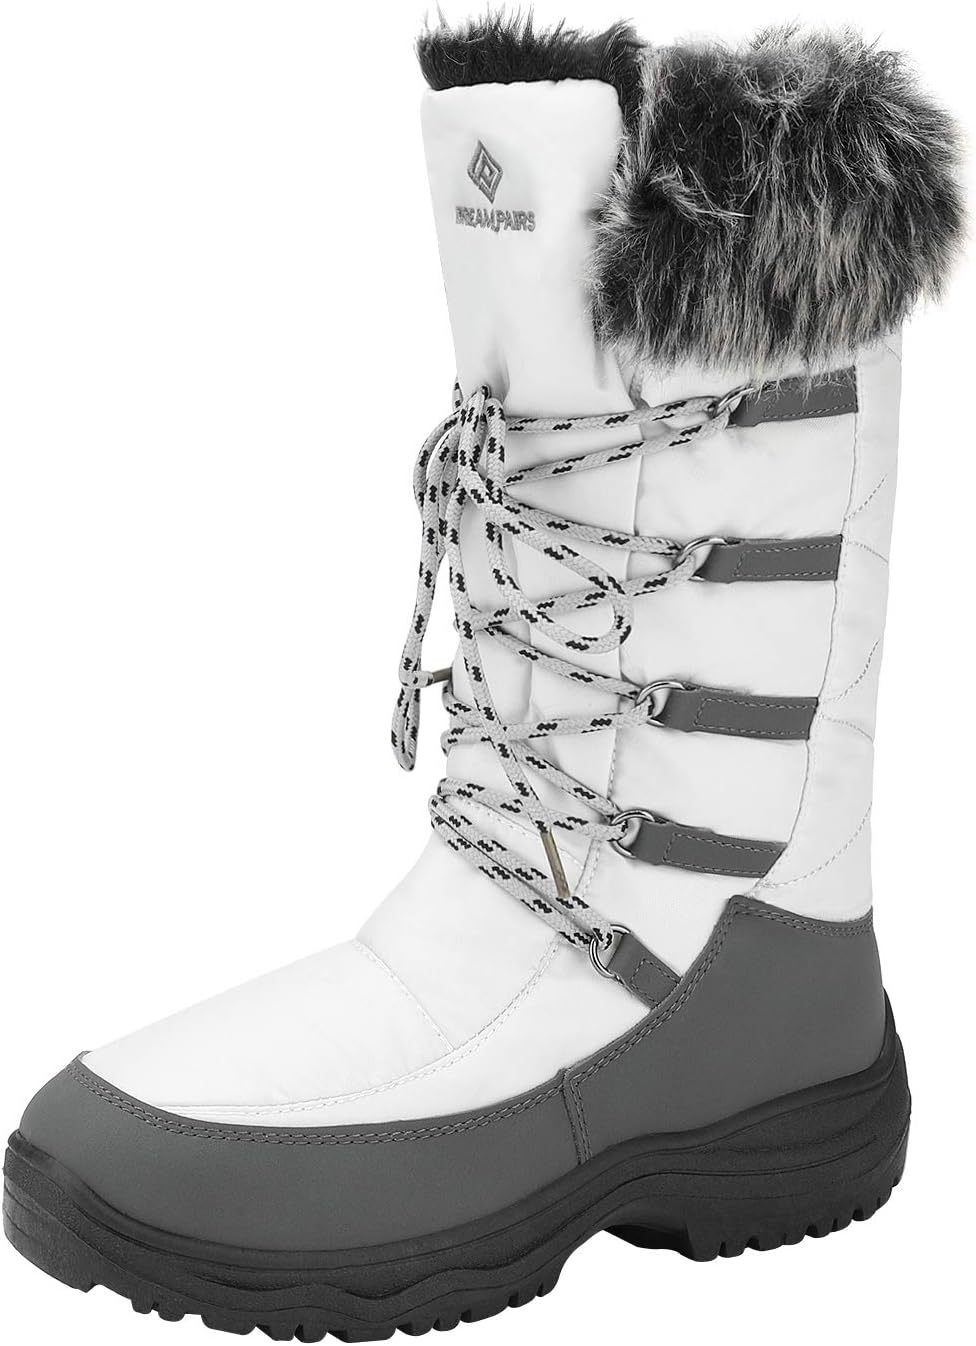 DREAM PAIRS Women' Warm Faux Fur Lined Mid-Calf Winter Snow Boots